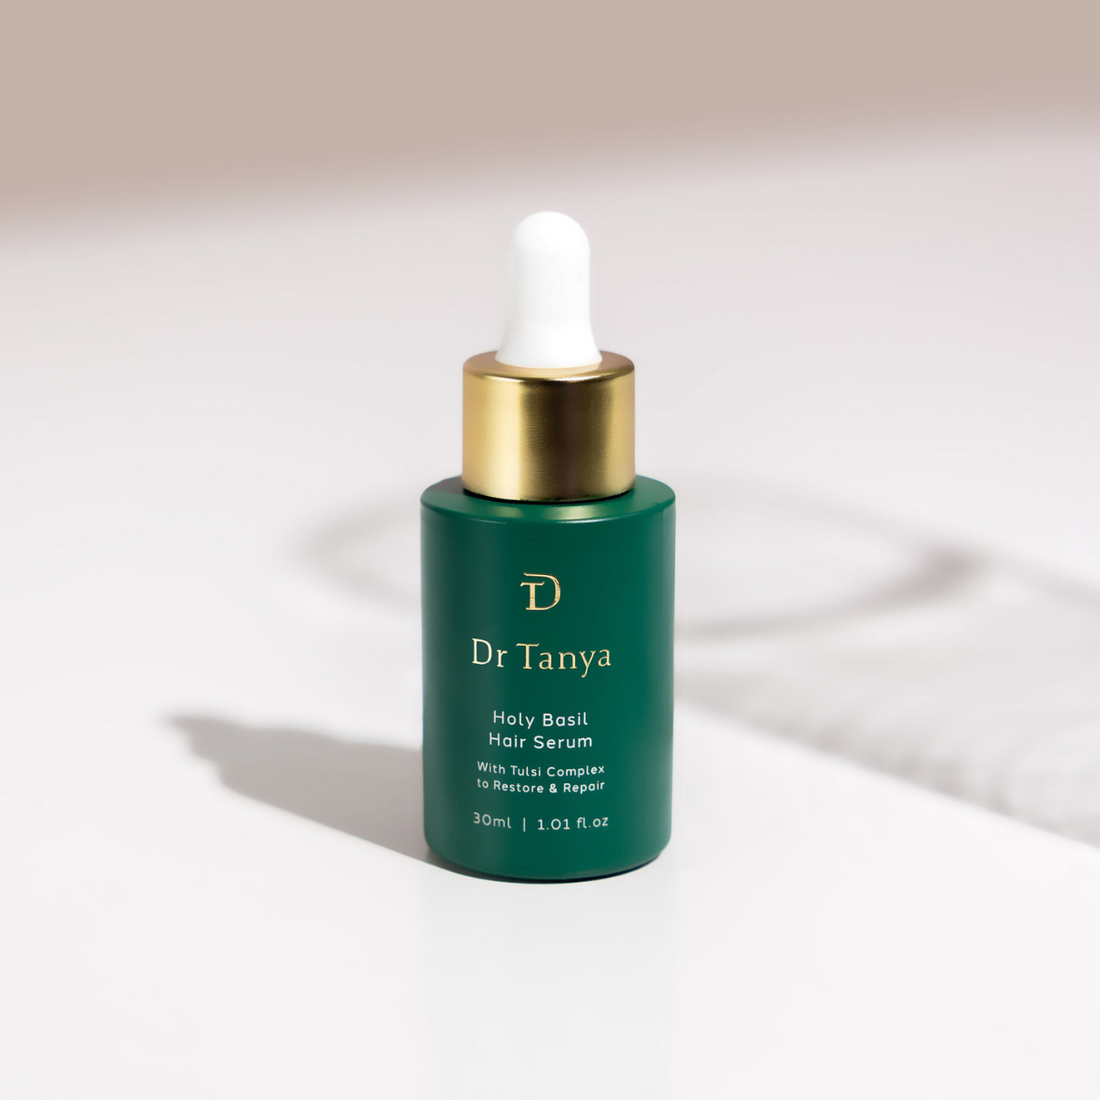 A green bottle of hair serum on a white surface with shadows cast